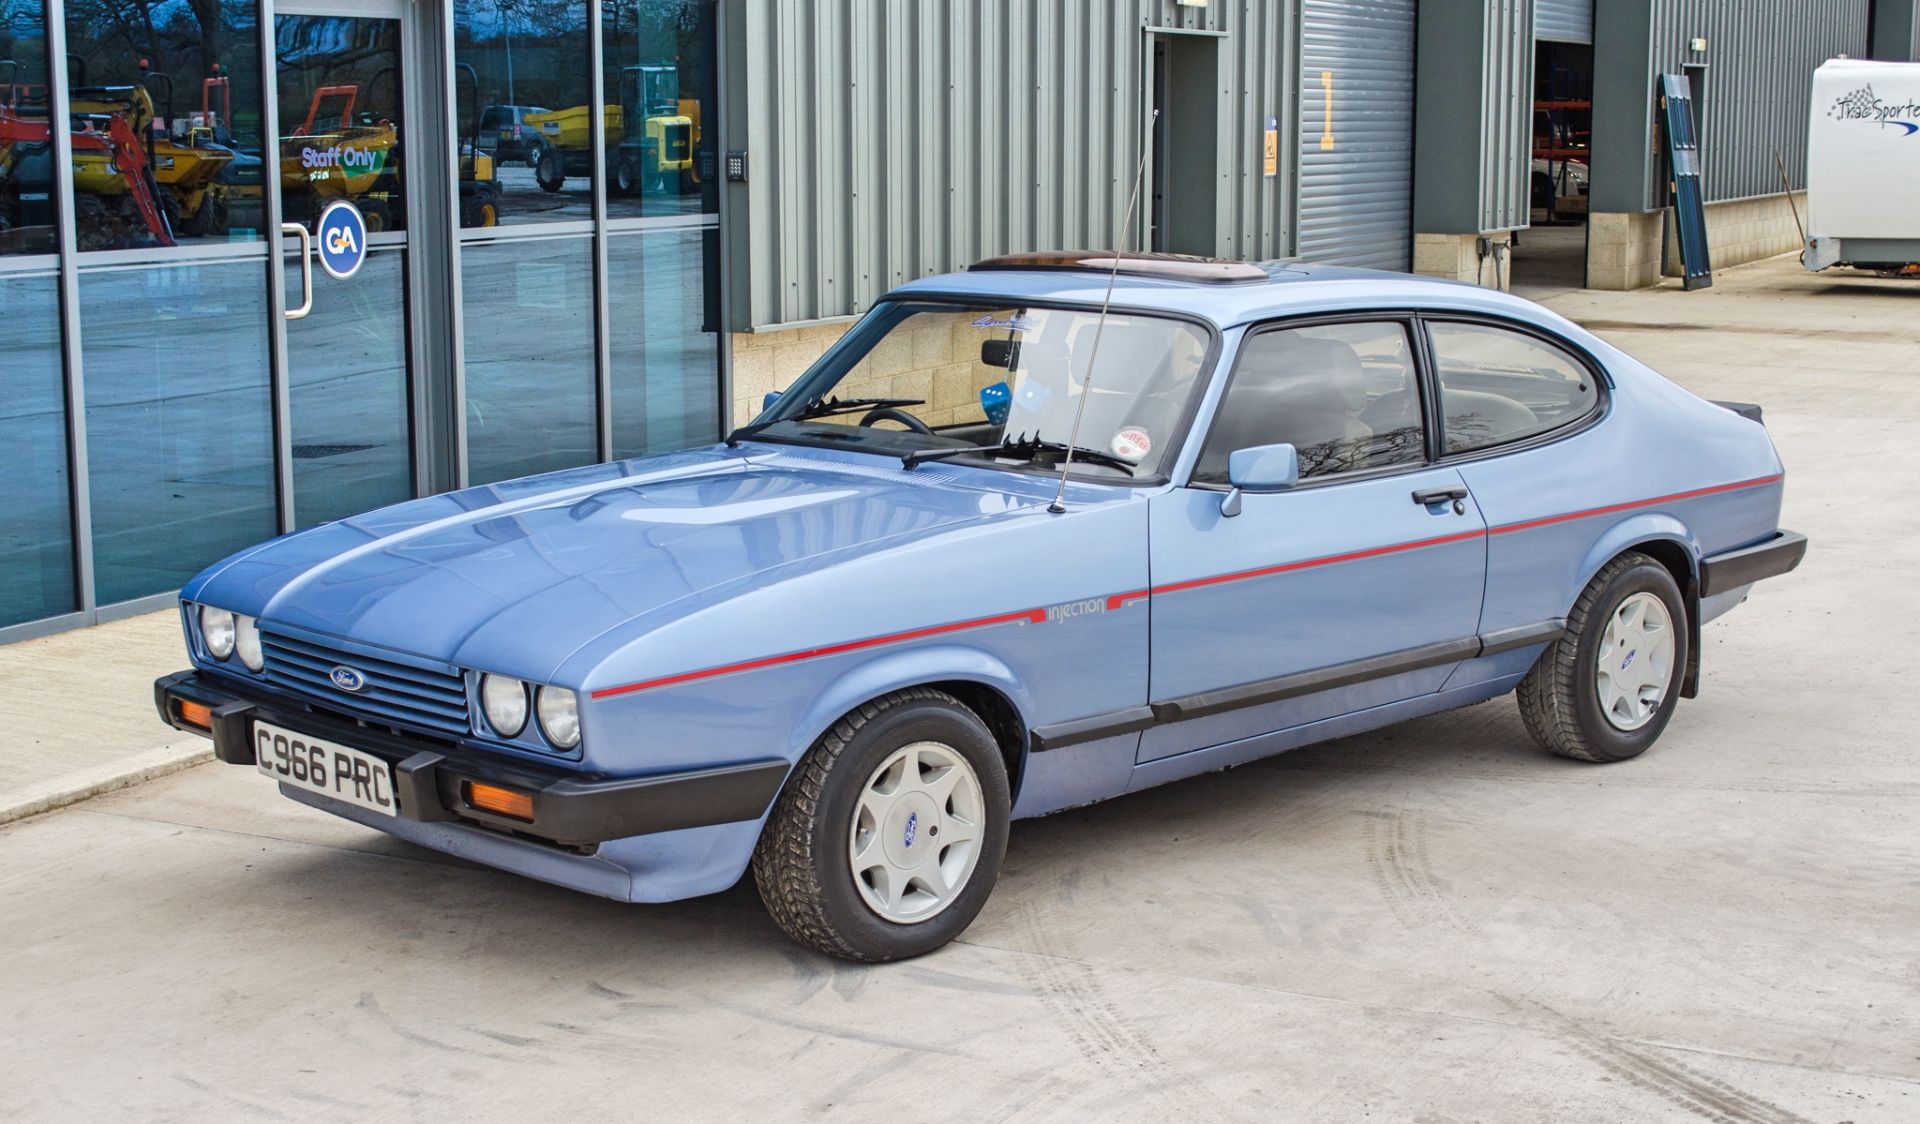 1986 Ford Capri 2.8 Injection Special 3 door coupe - Image 4 of 56